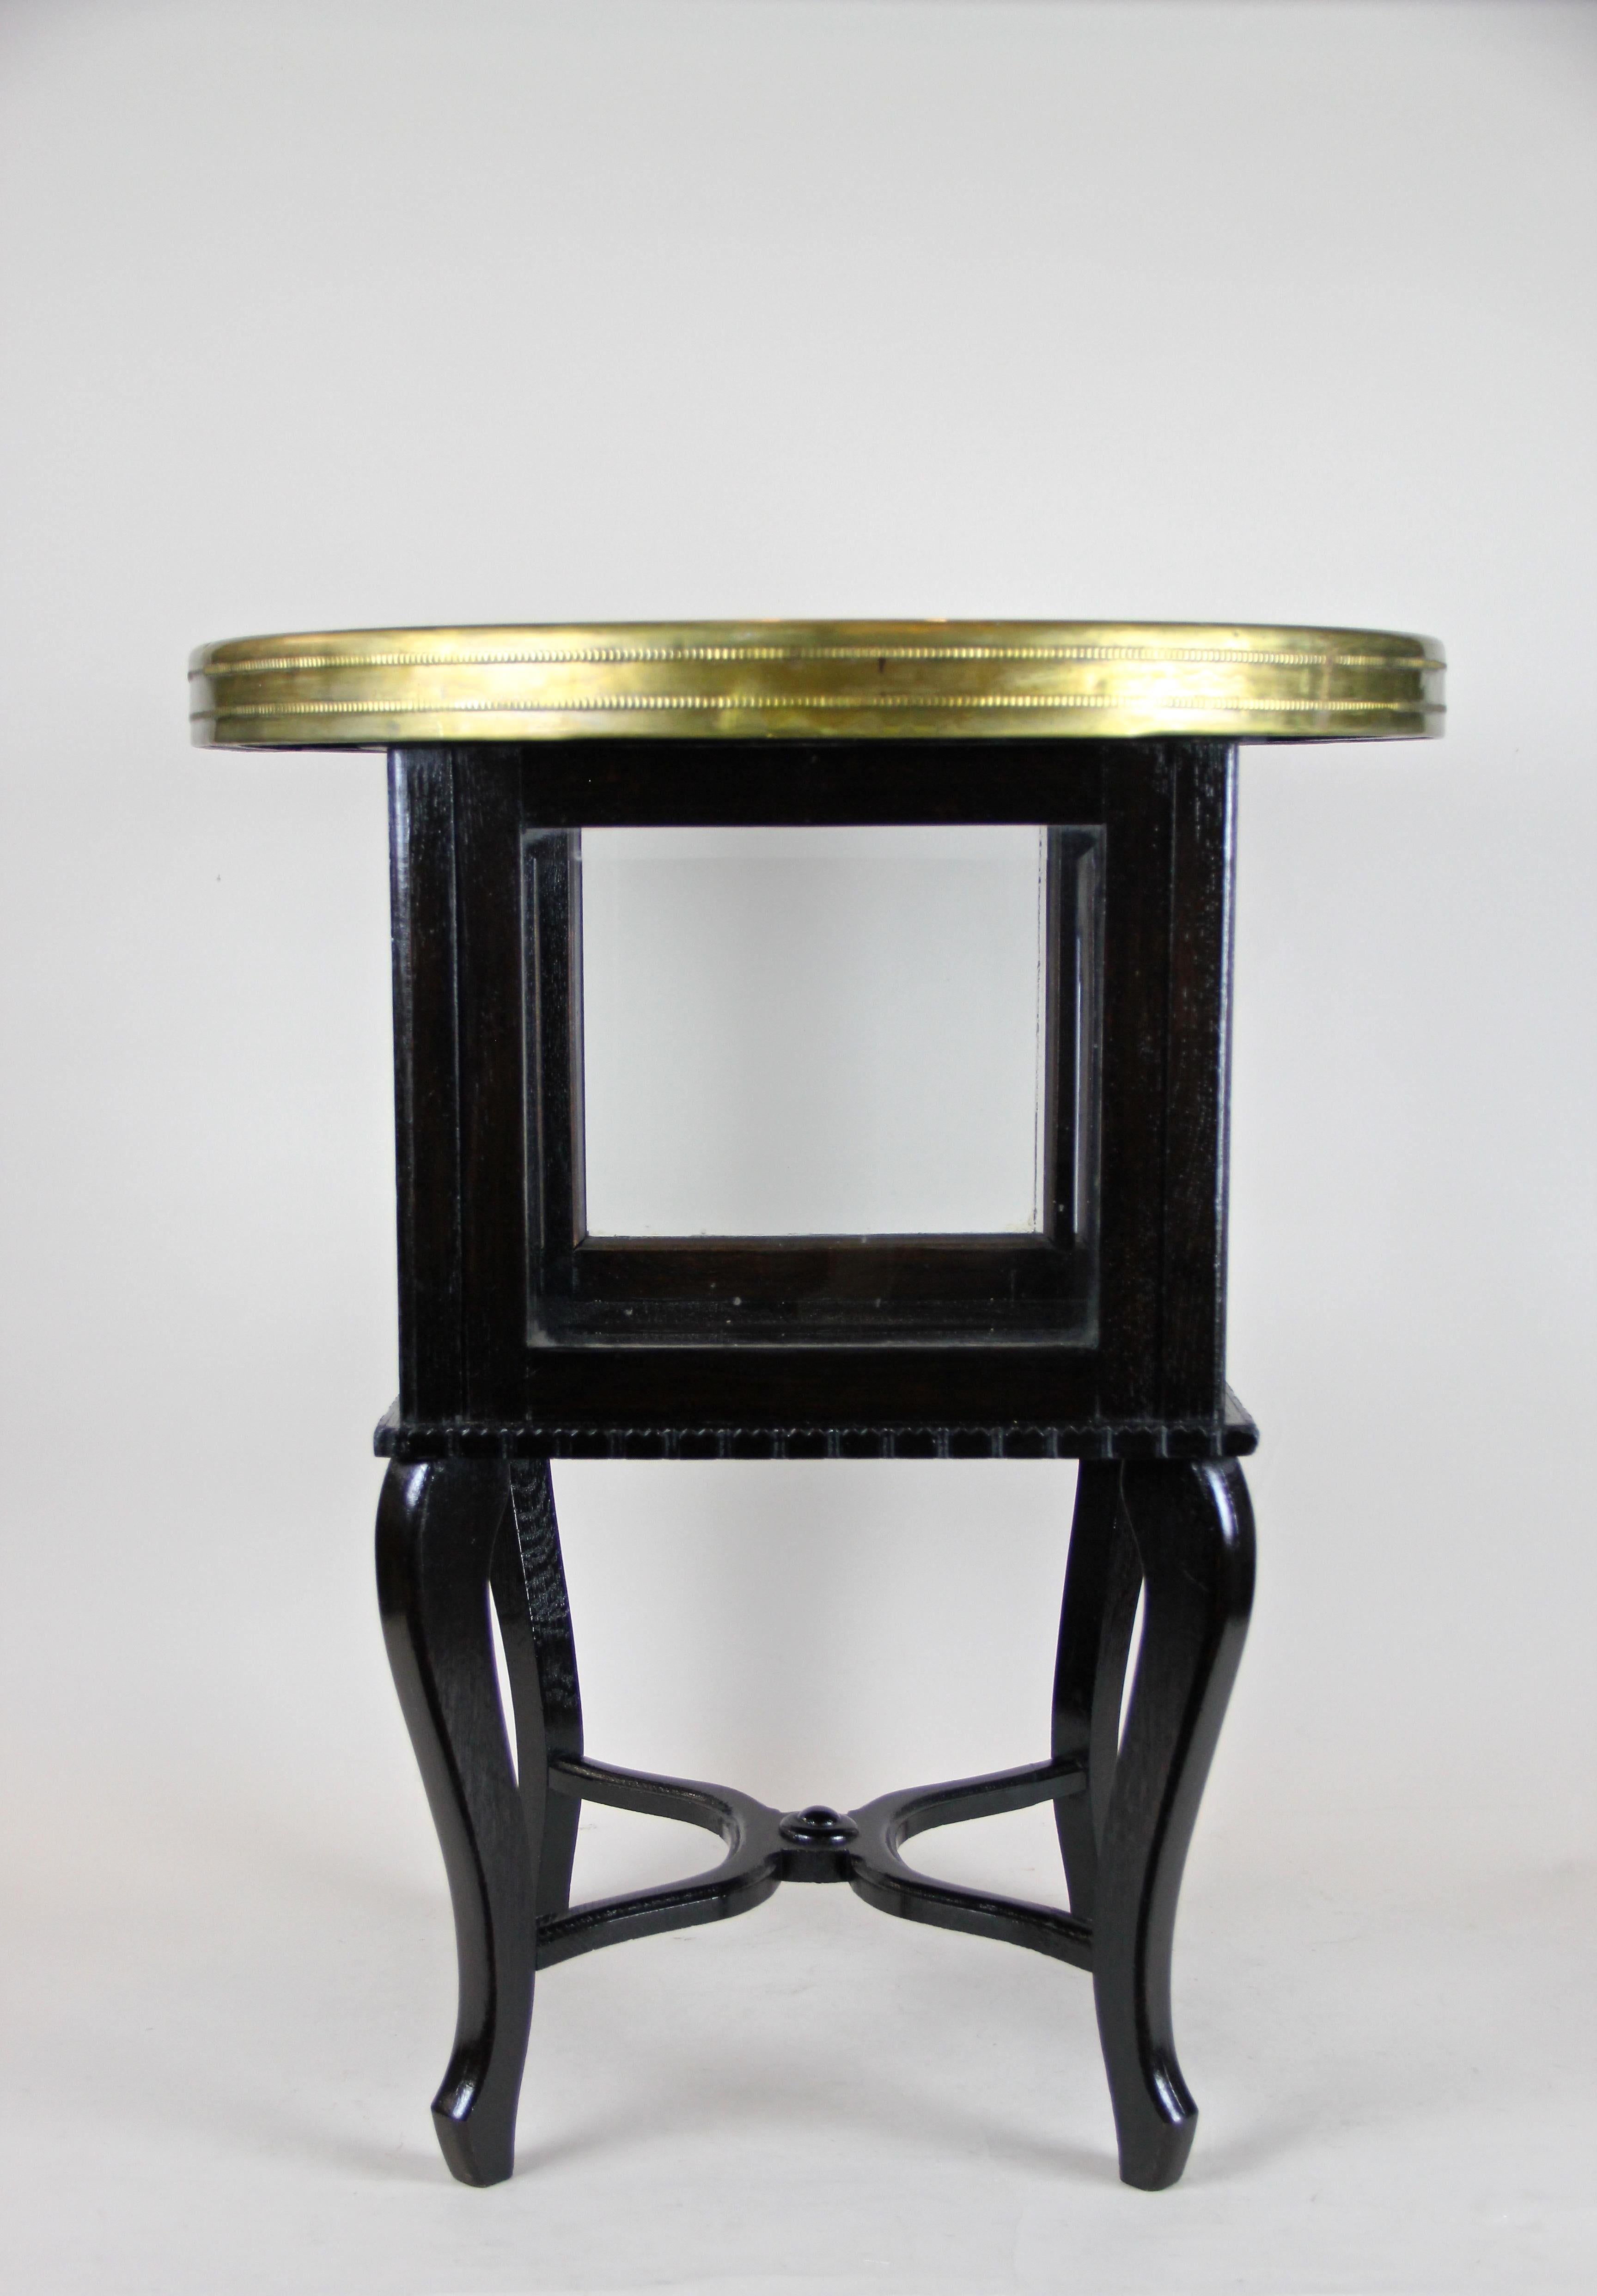 1920 side table